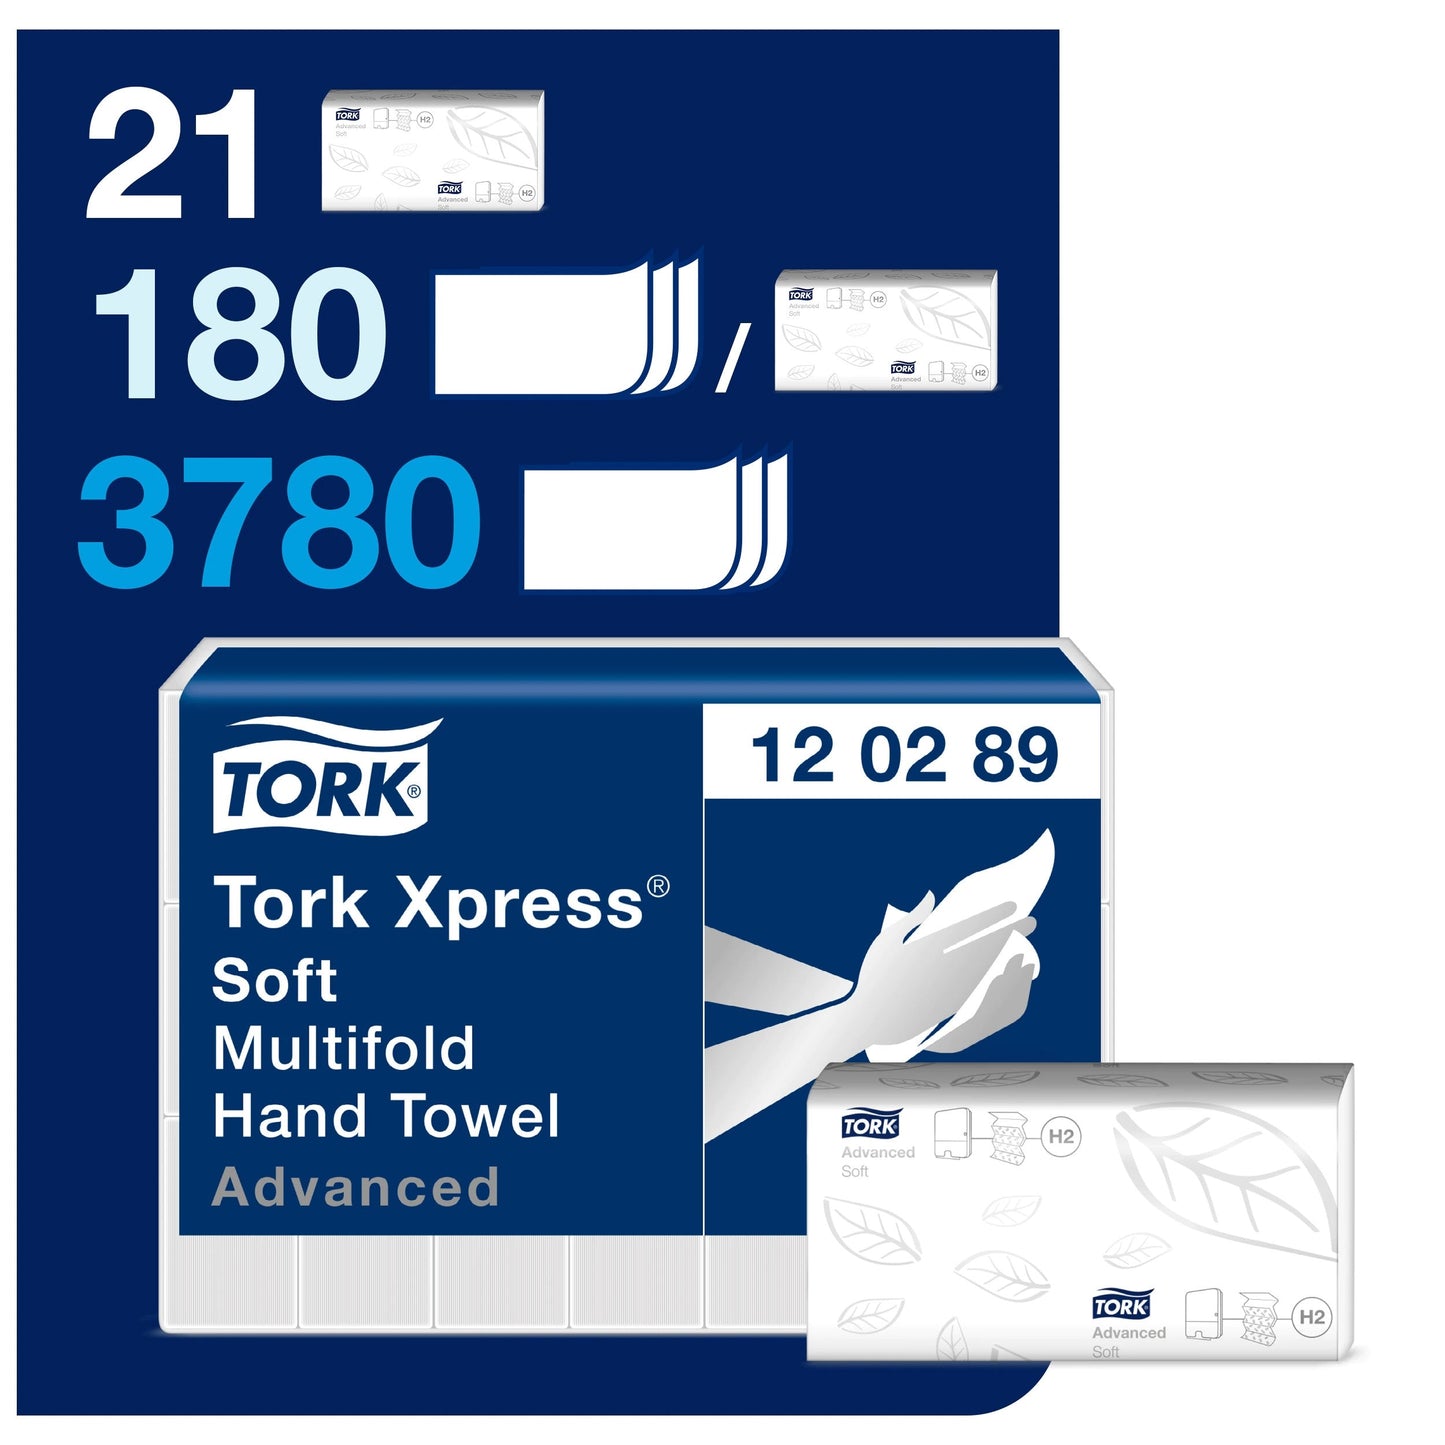 Tork Soft Multifold Hand Towel 2Ply - 130289 - Case of 21 x 180 Sheets